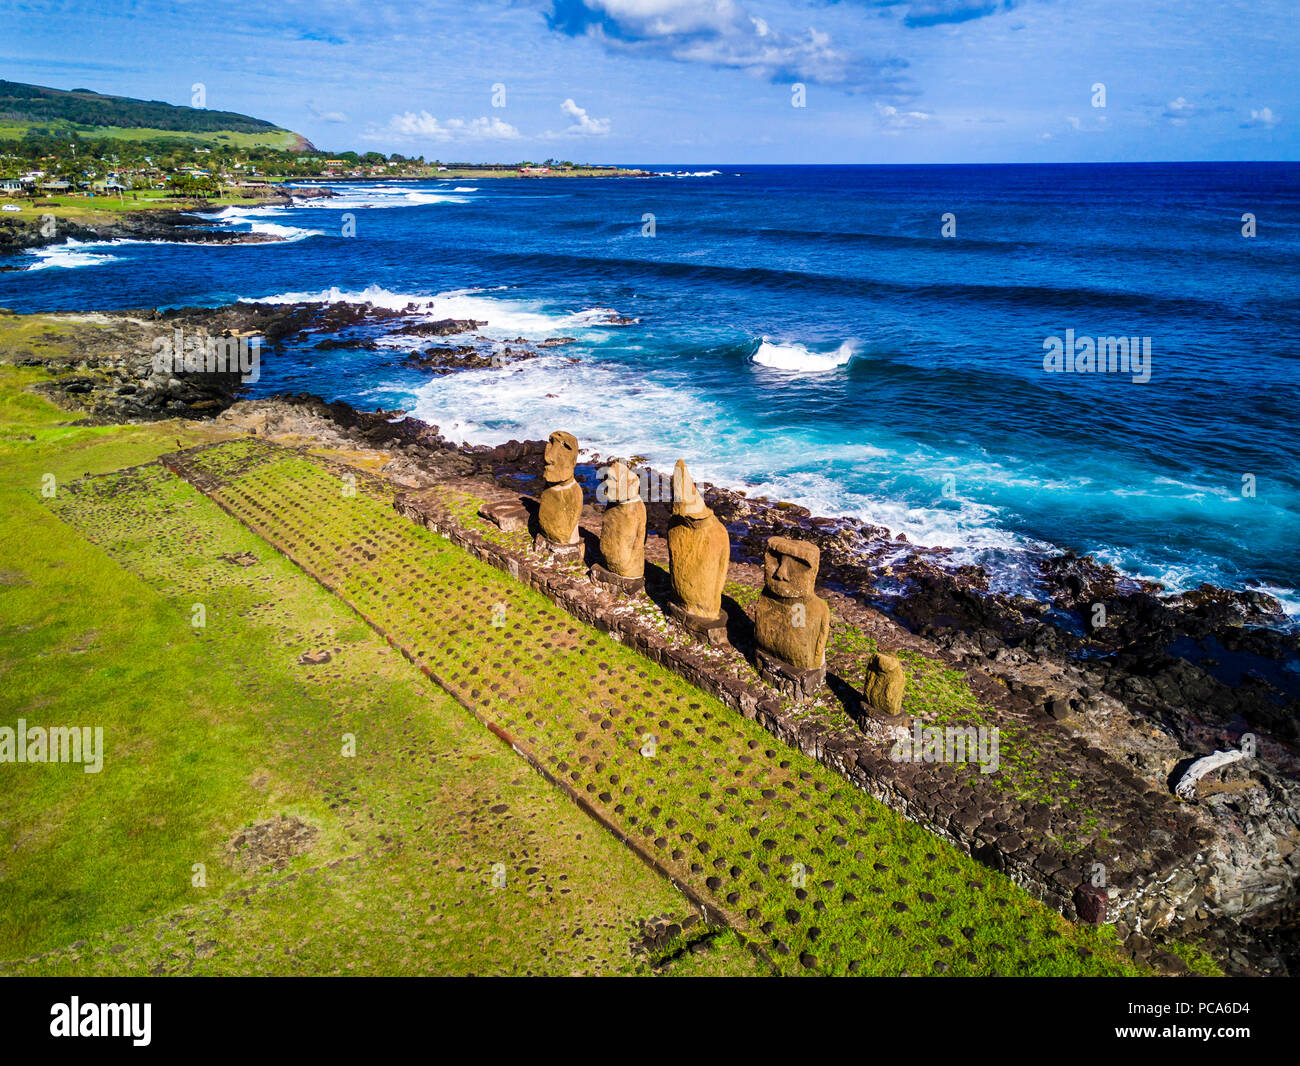 An Aerial View over Ahu Tahai alone Moai at Hanga Roa, Easter Island. This is the only one with painted eyes like it was on the past. Stock Photo